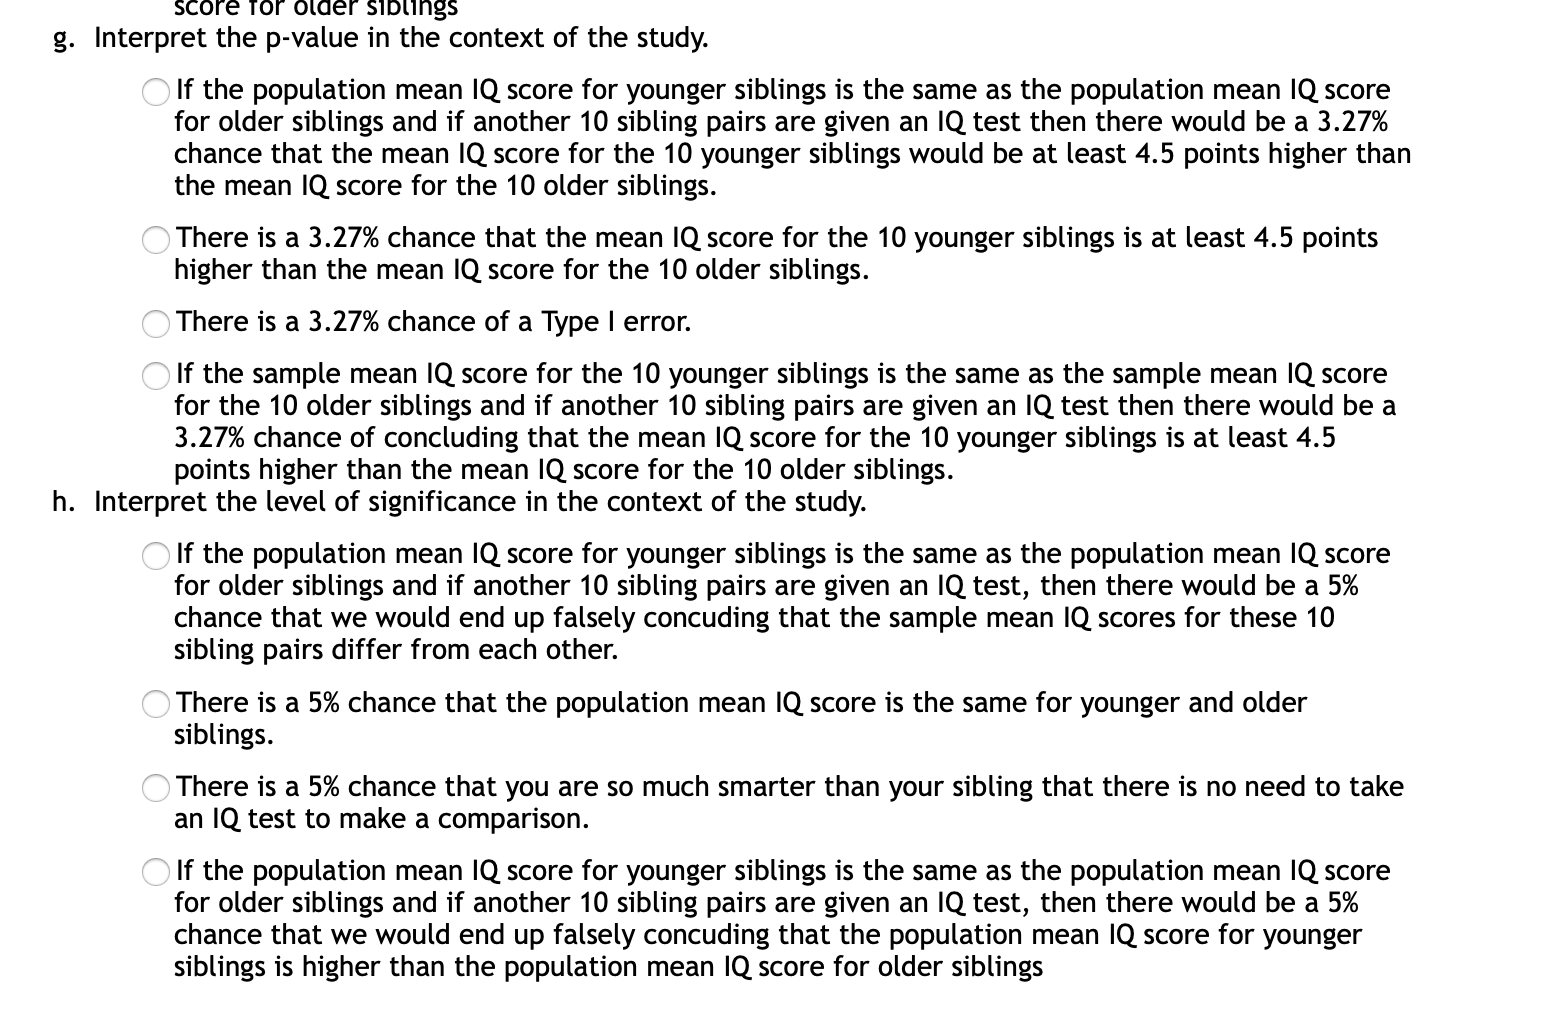 g. Interpret the p-value in the context of the study.
O If the population mean IQ score for younger siblings is the same as the population mean IQ score
for older siblings and if another 10 sibling pairs are given an IQ test then there would be a 3.27%
chance that the mean IQ score for the 10 younger siblings would be at least 4.5 points higher than
the mean IQ score for the 10 older siblings.
There is a 3.27% chance that the mean IQ score for the 10 younger siblings is at least 4.5 points
higher than the mean IQ score for the 10 older siblings.
) There is a 3.27% chance of a Type I error.
If the sample mean IQ score for the 10 younger siblings is the same as the sample mean IQ score
for the 10 older siblings and if another 10 sibling pairs are given an IQ test then there would be a
3.27% chance of concluding that the mean IQ score for the 10 younger siblings is at least 4.5
points higher than the mean IQ score for the 10 older siblings.
h. Interpret the level of significance in the context of the study.
O If the population mean IQ score for younger siblings is the same as the population mean IQ score
for older siblings and if another 10 sibling pairs are given an IQ test, then there would be a 5%
chance that we would end up falsely concuding that the sample mean IQ scores for these 10
sibling pairs differ from each other.
O There is a 5% chance that the population mean IQ score is the same for younger and older
siblings.
OThere is a 5% chance that you are so much smarter than your sibling that there is no need to take
an IQ test to make a comparison.
O If the population mean IQ score for younger siblings is the same as the population mean IQ score
for older siblings and if another 10 sibling pairs are given an IQ test, then there would be a 5%
chance that we would end up falsely concuding that the population mean IQ score for younger
siblings is higher than the population mean IQ score for older siblings
